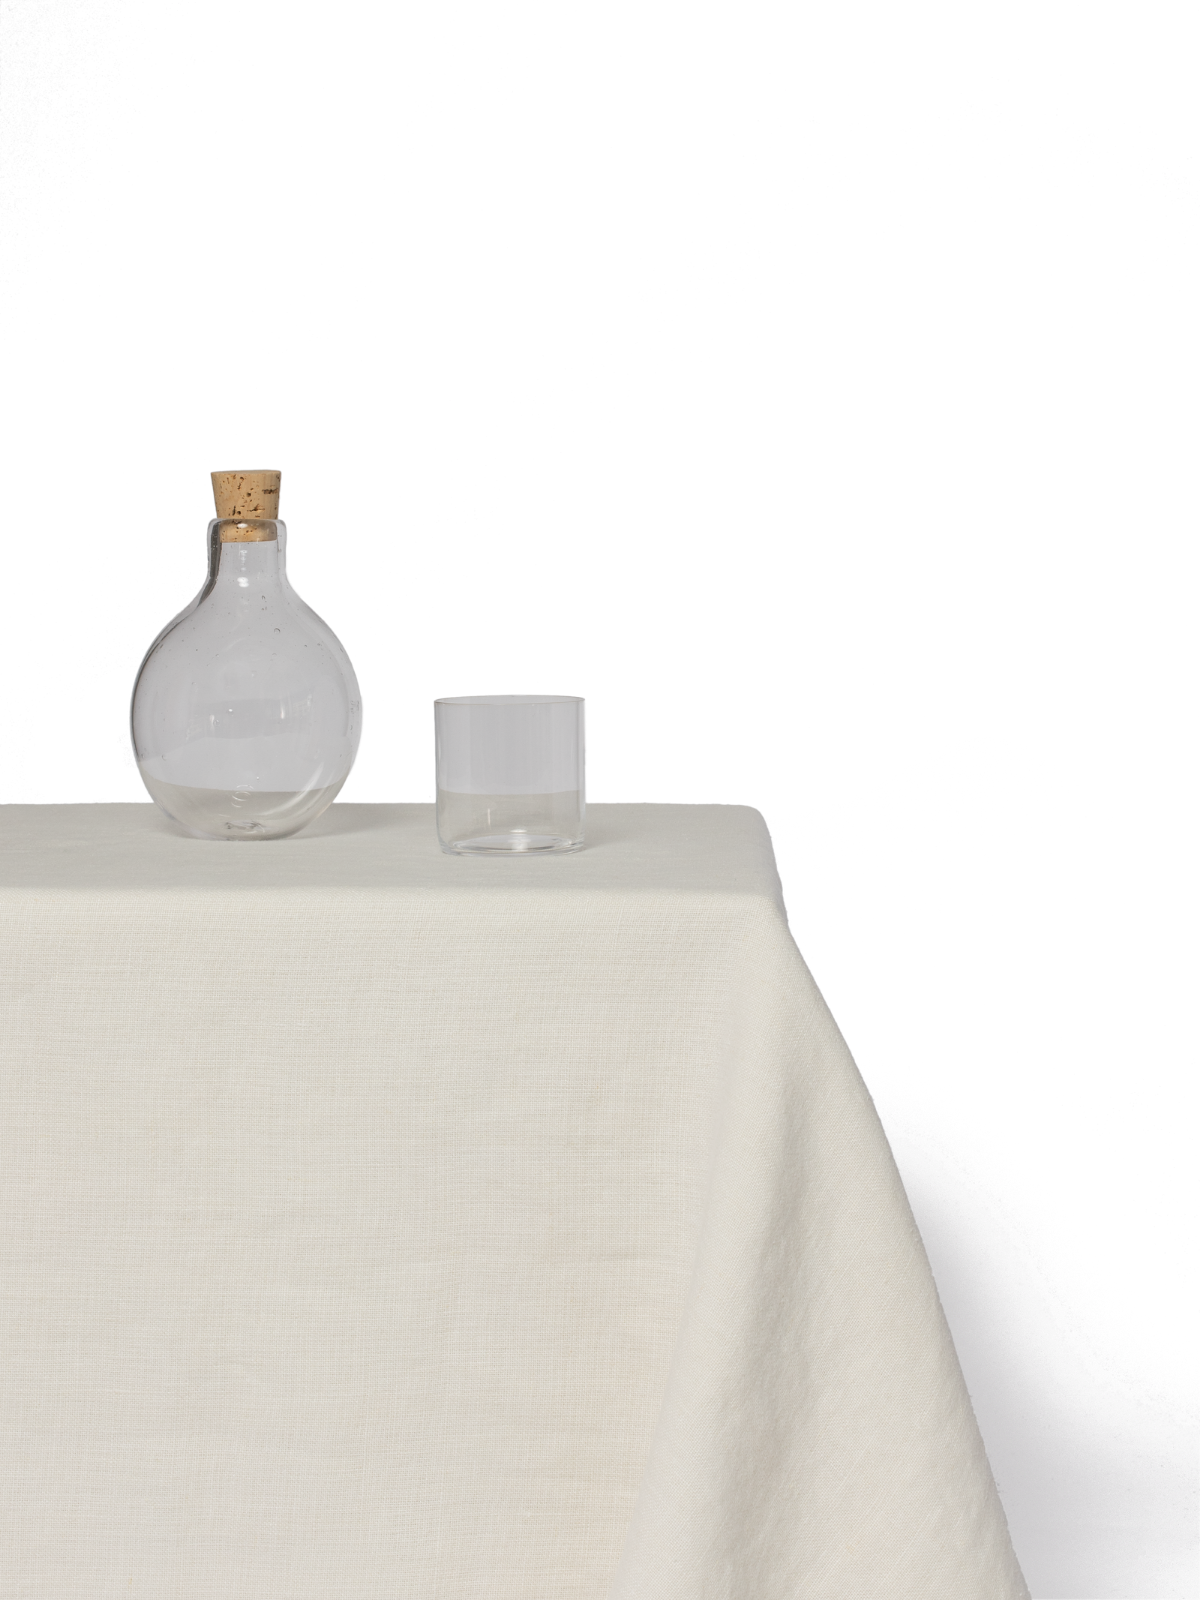 The Heirloom Tablecloth